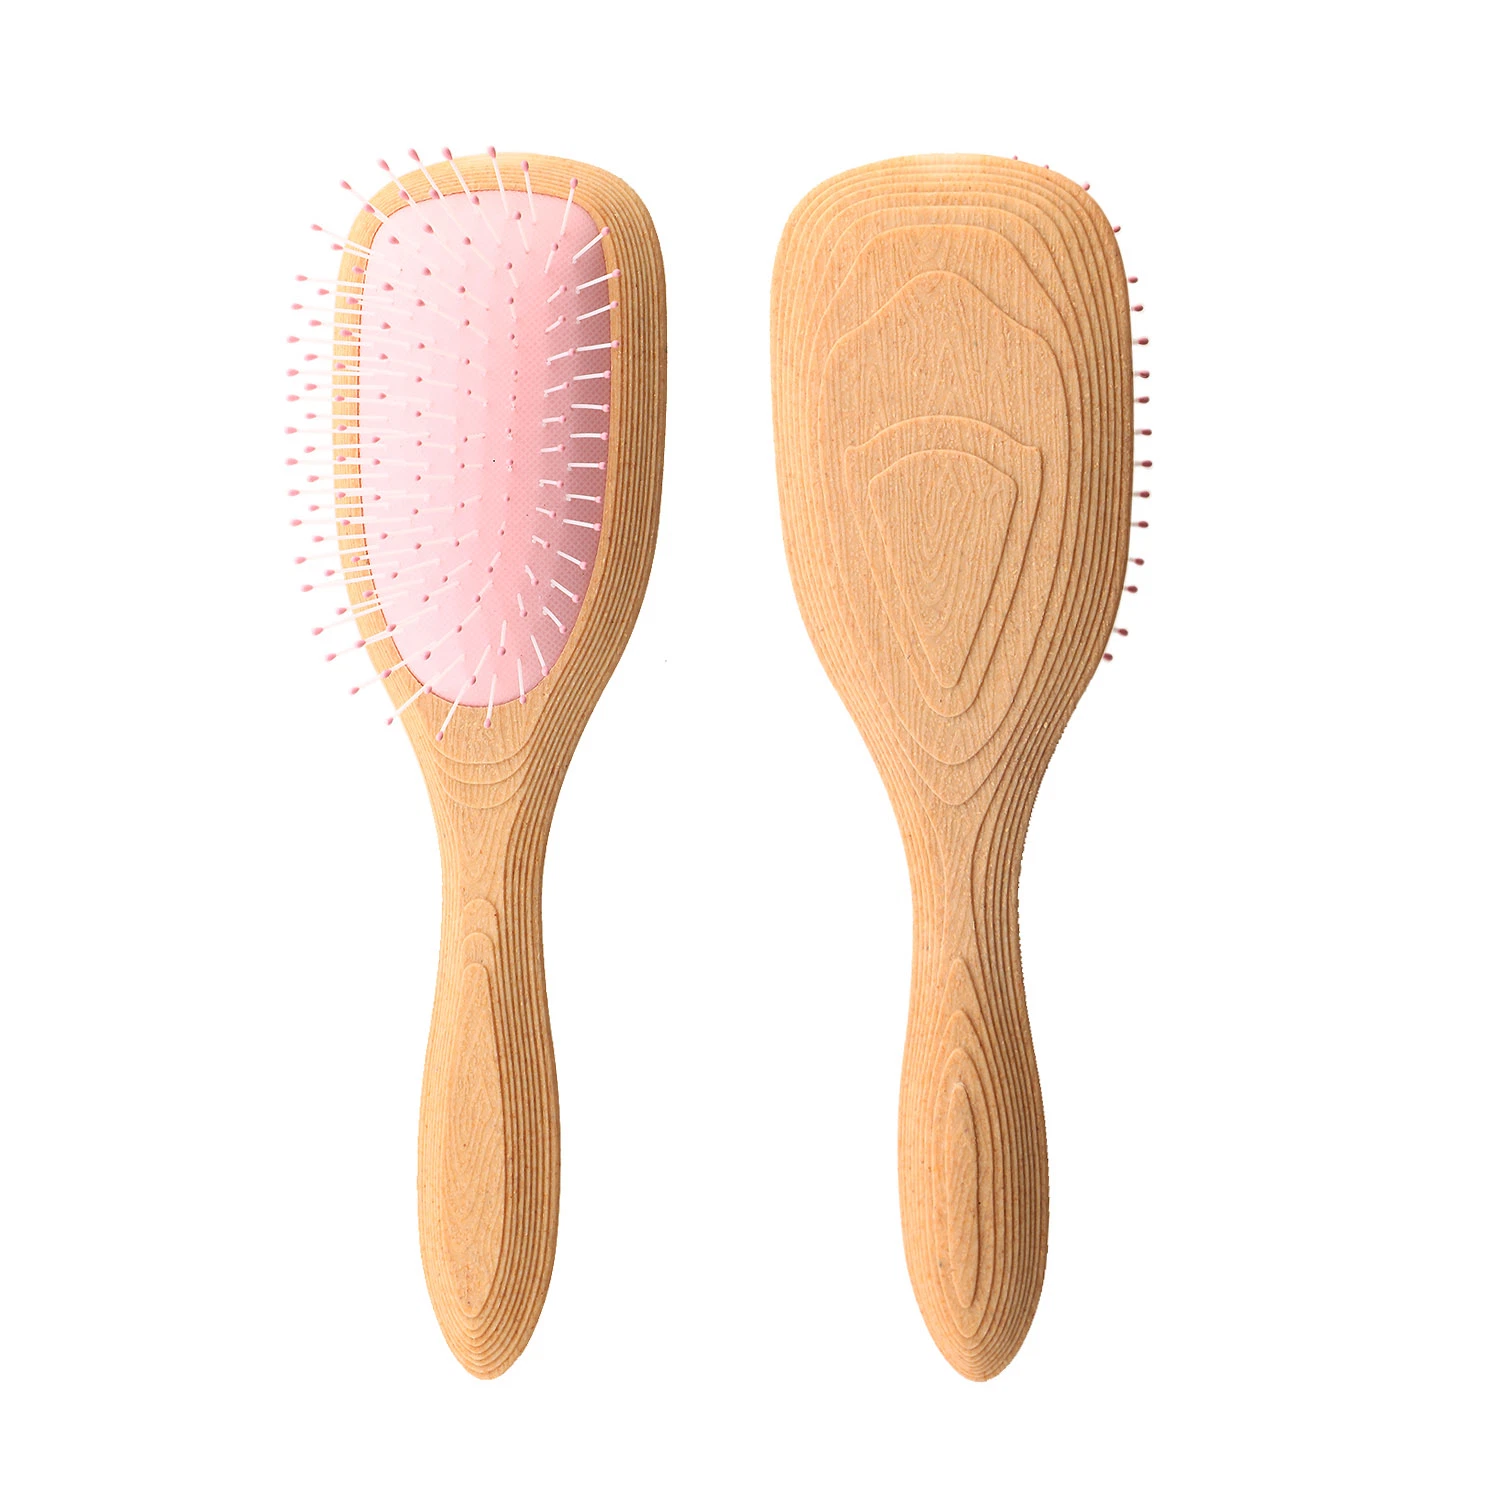 New Eco-Friendly Detangling & Massage Comb Hair Styling and Hair Care Tool Hair Brush for Home/Travel Use